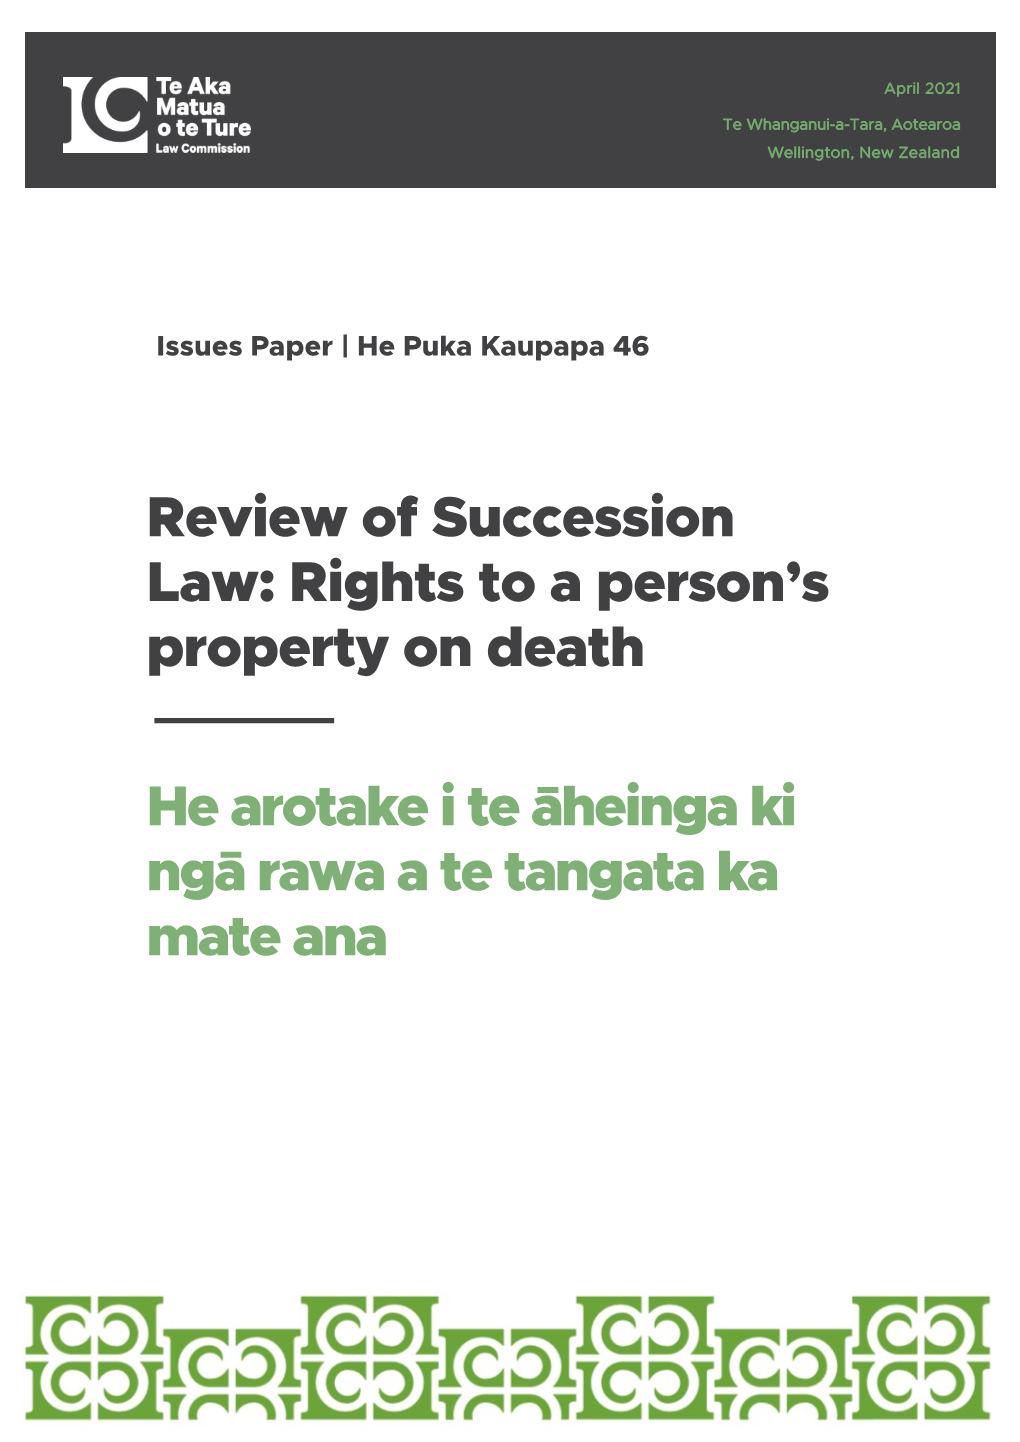 Review of Succession Law: Rights to a Person's Property on Death